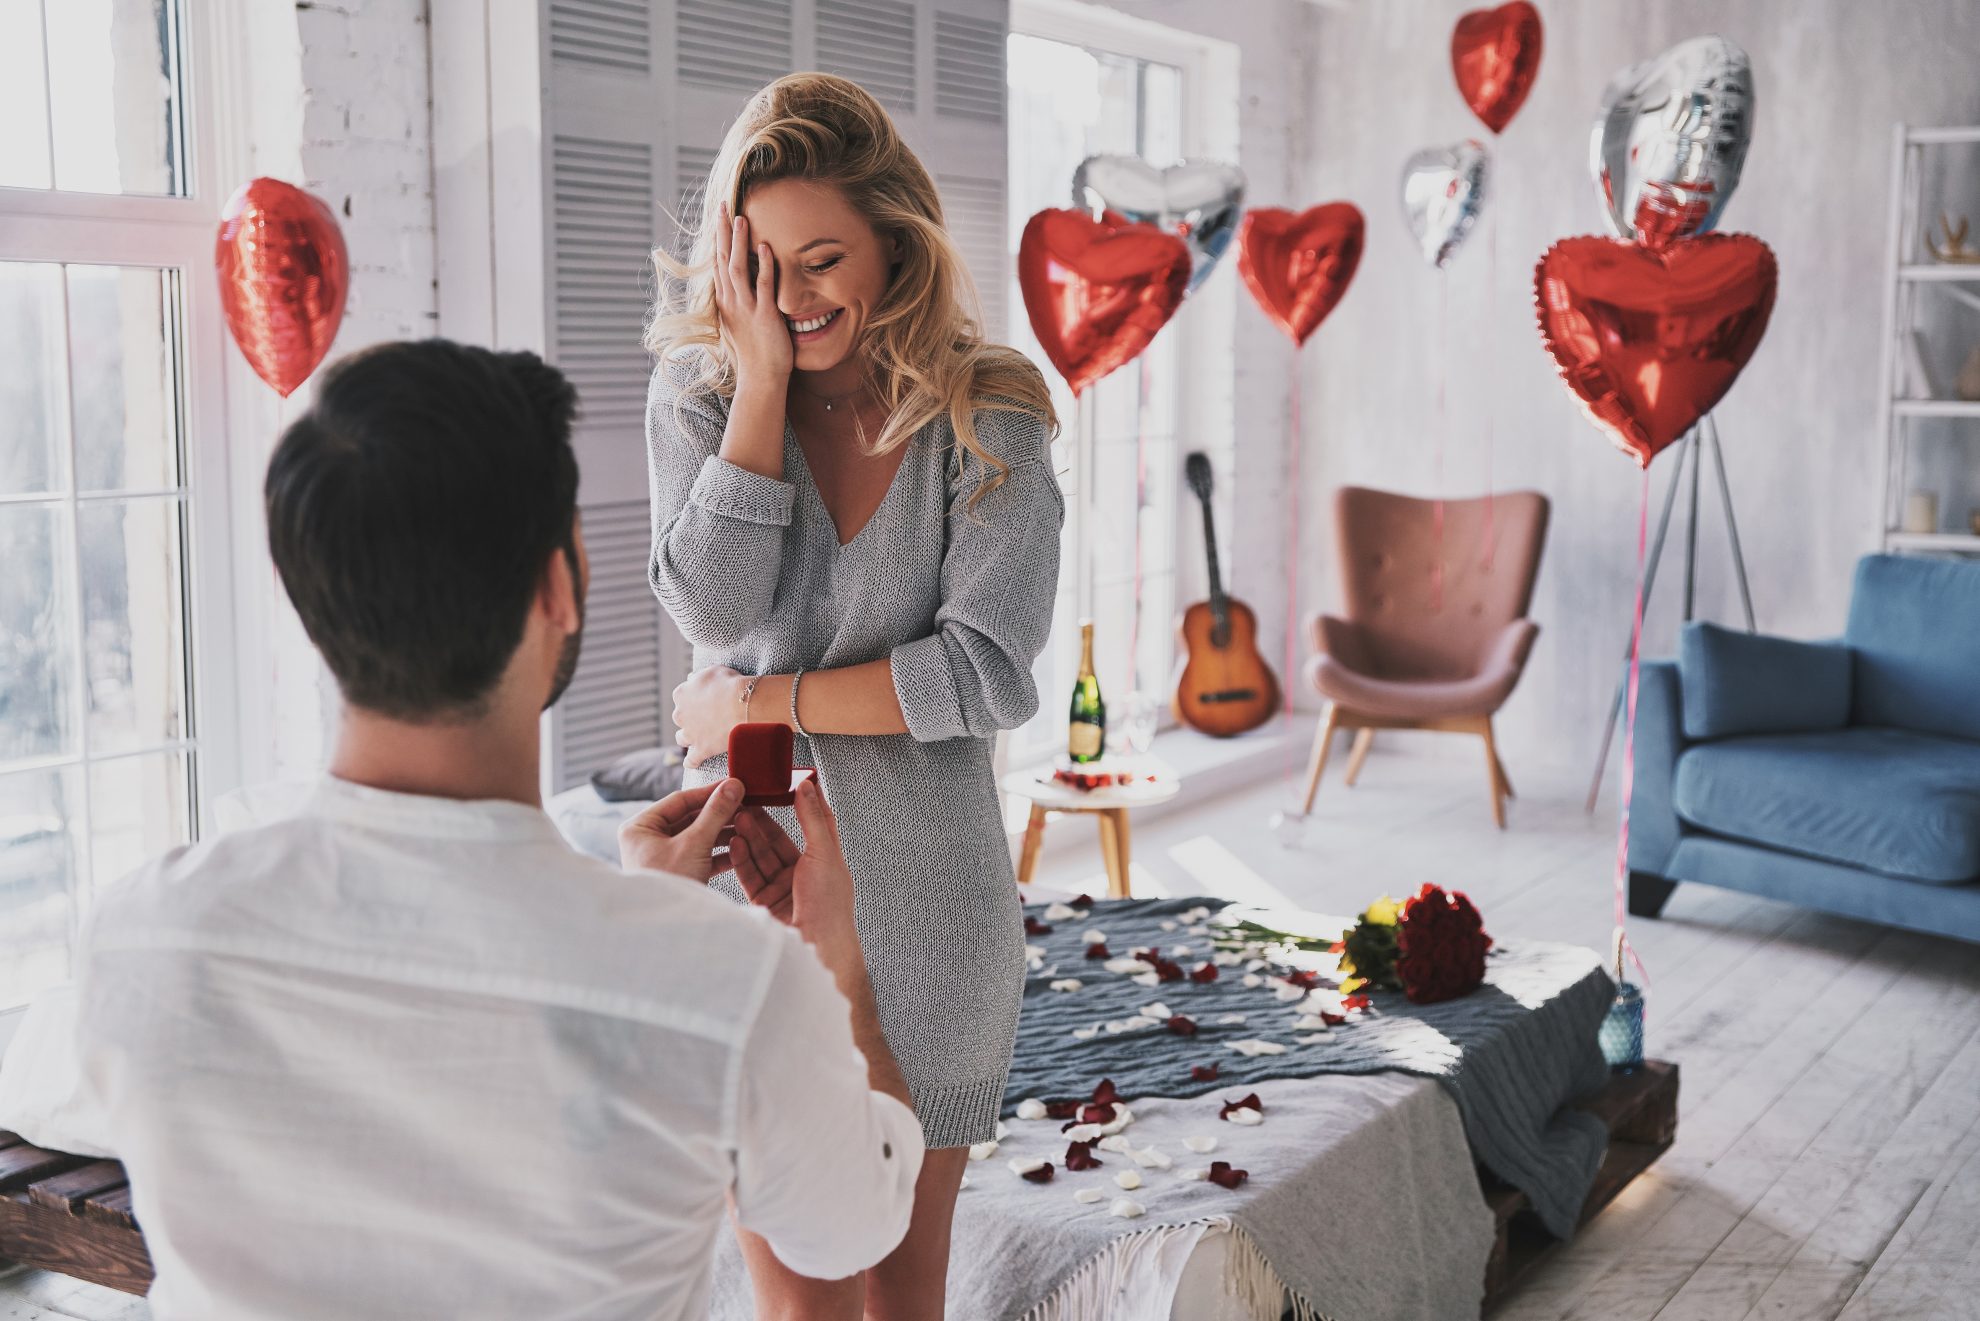 A woman looks happy as a male is on one knee in front holding an engagement ring box. Red and silver heart balloons are seen in the background. Image used in the 8 signs your partner is going to propose article.